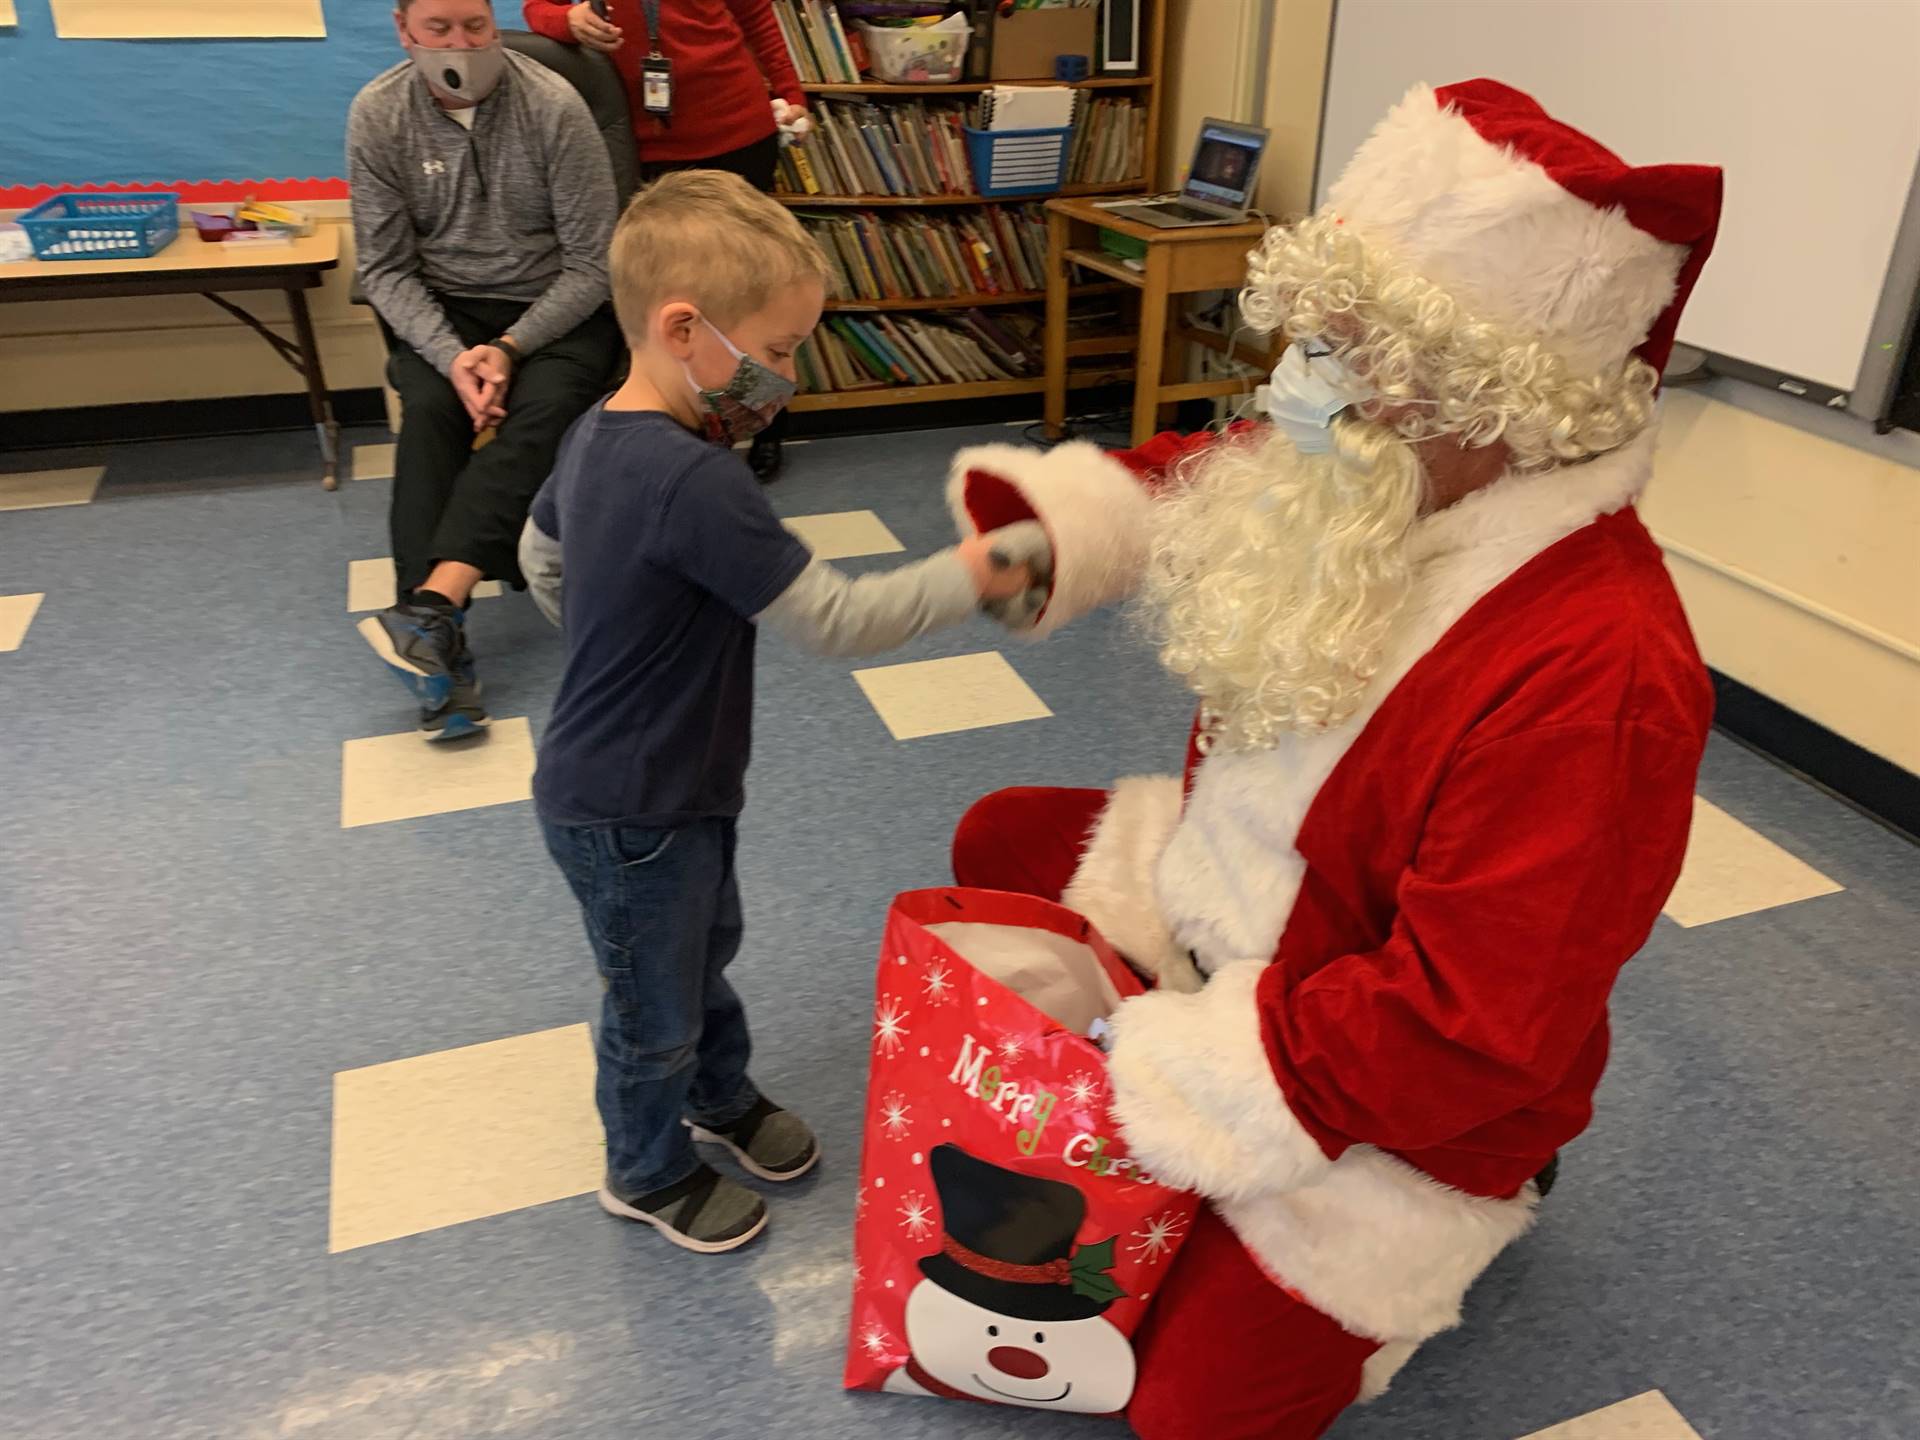 Santa gives a student the magic knuckle pound.